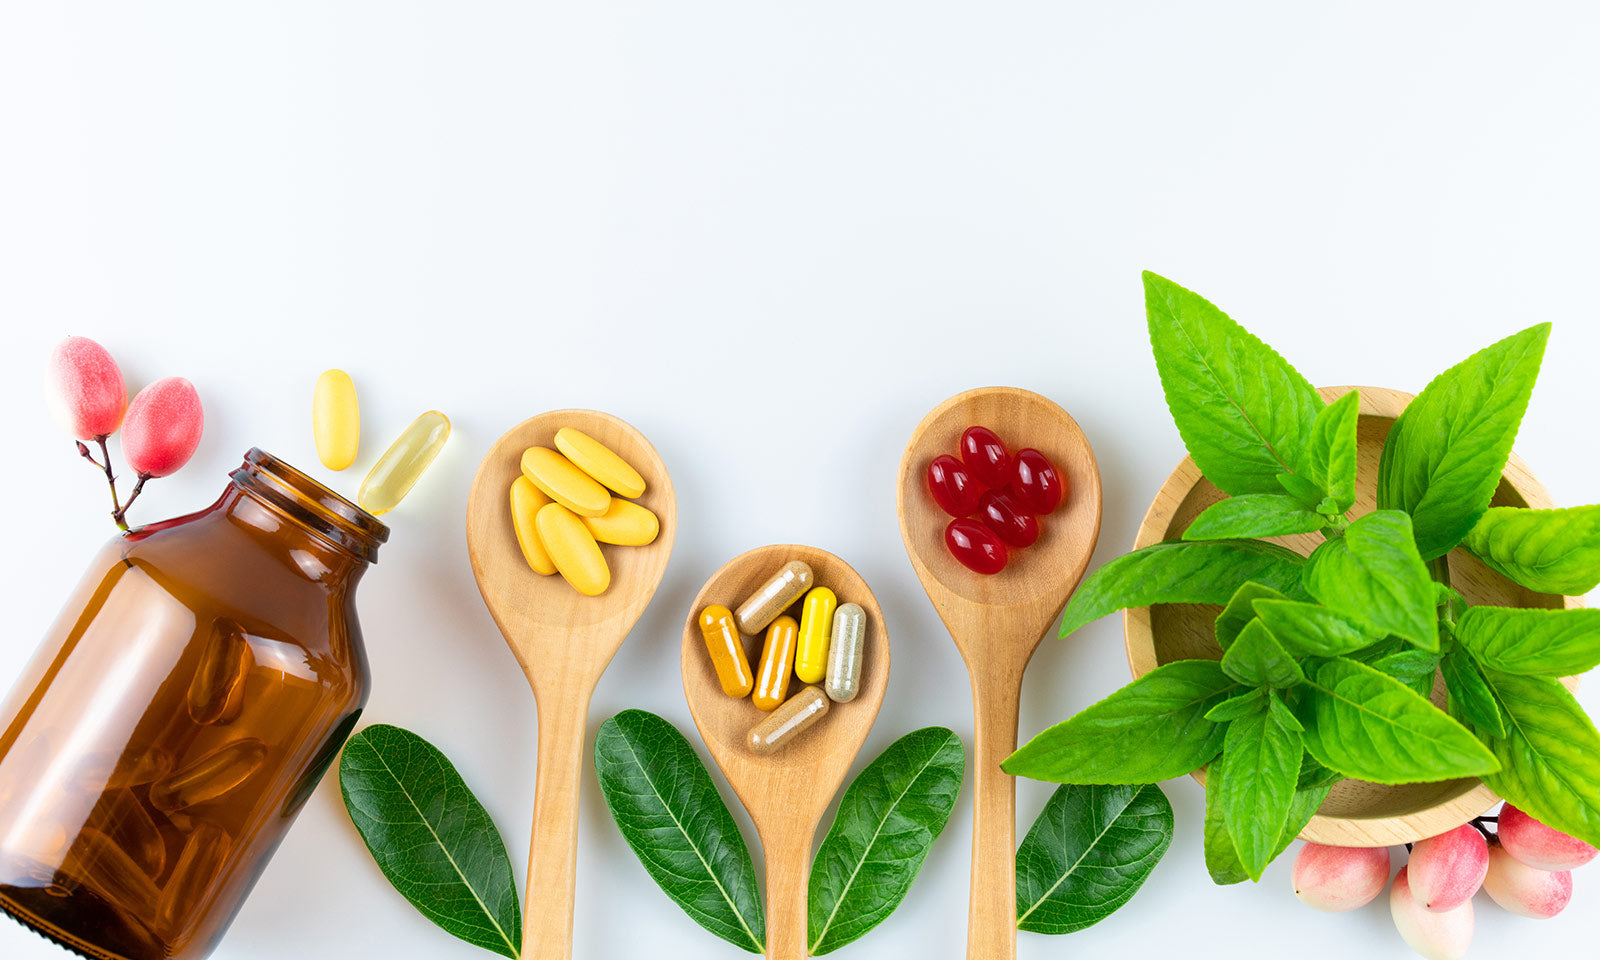 5 Interesting Facts About Supplements and the Supplement Industry